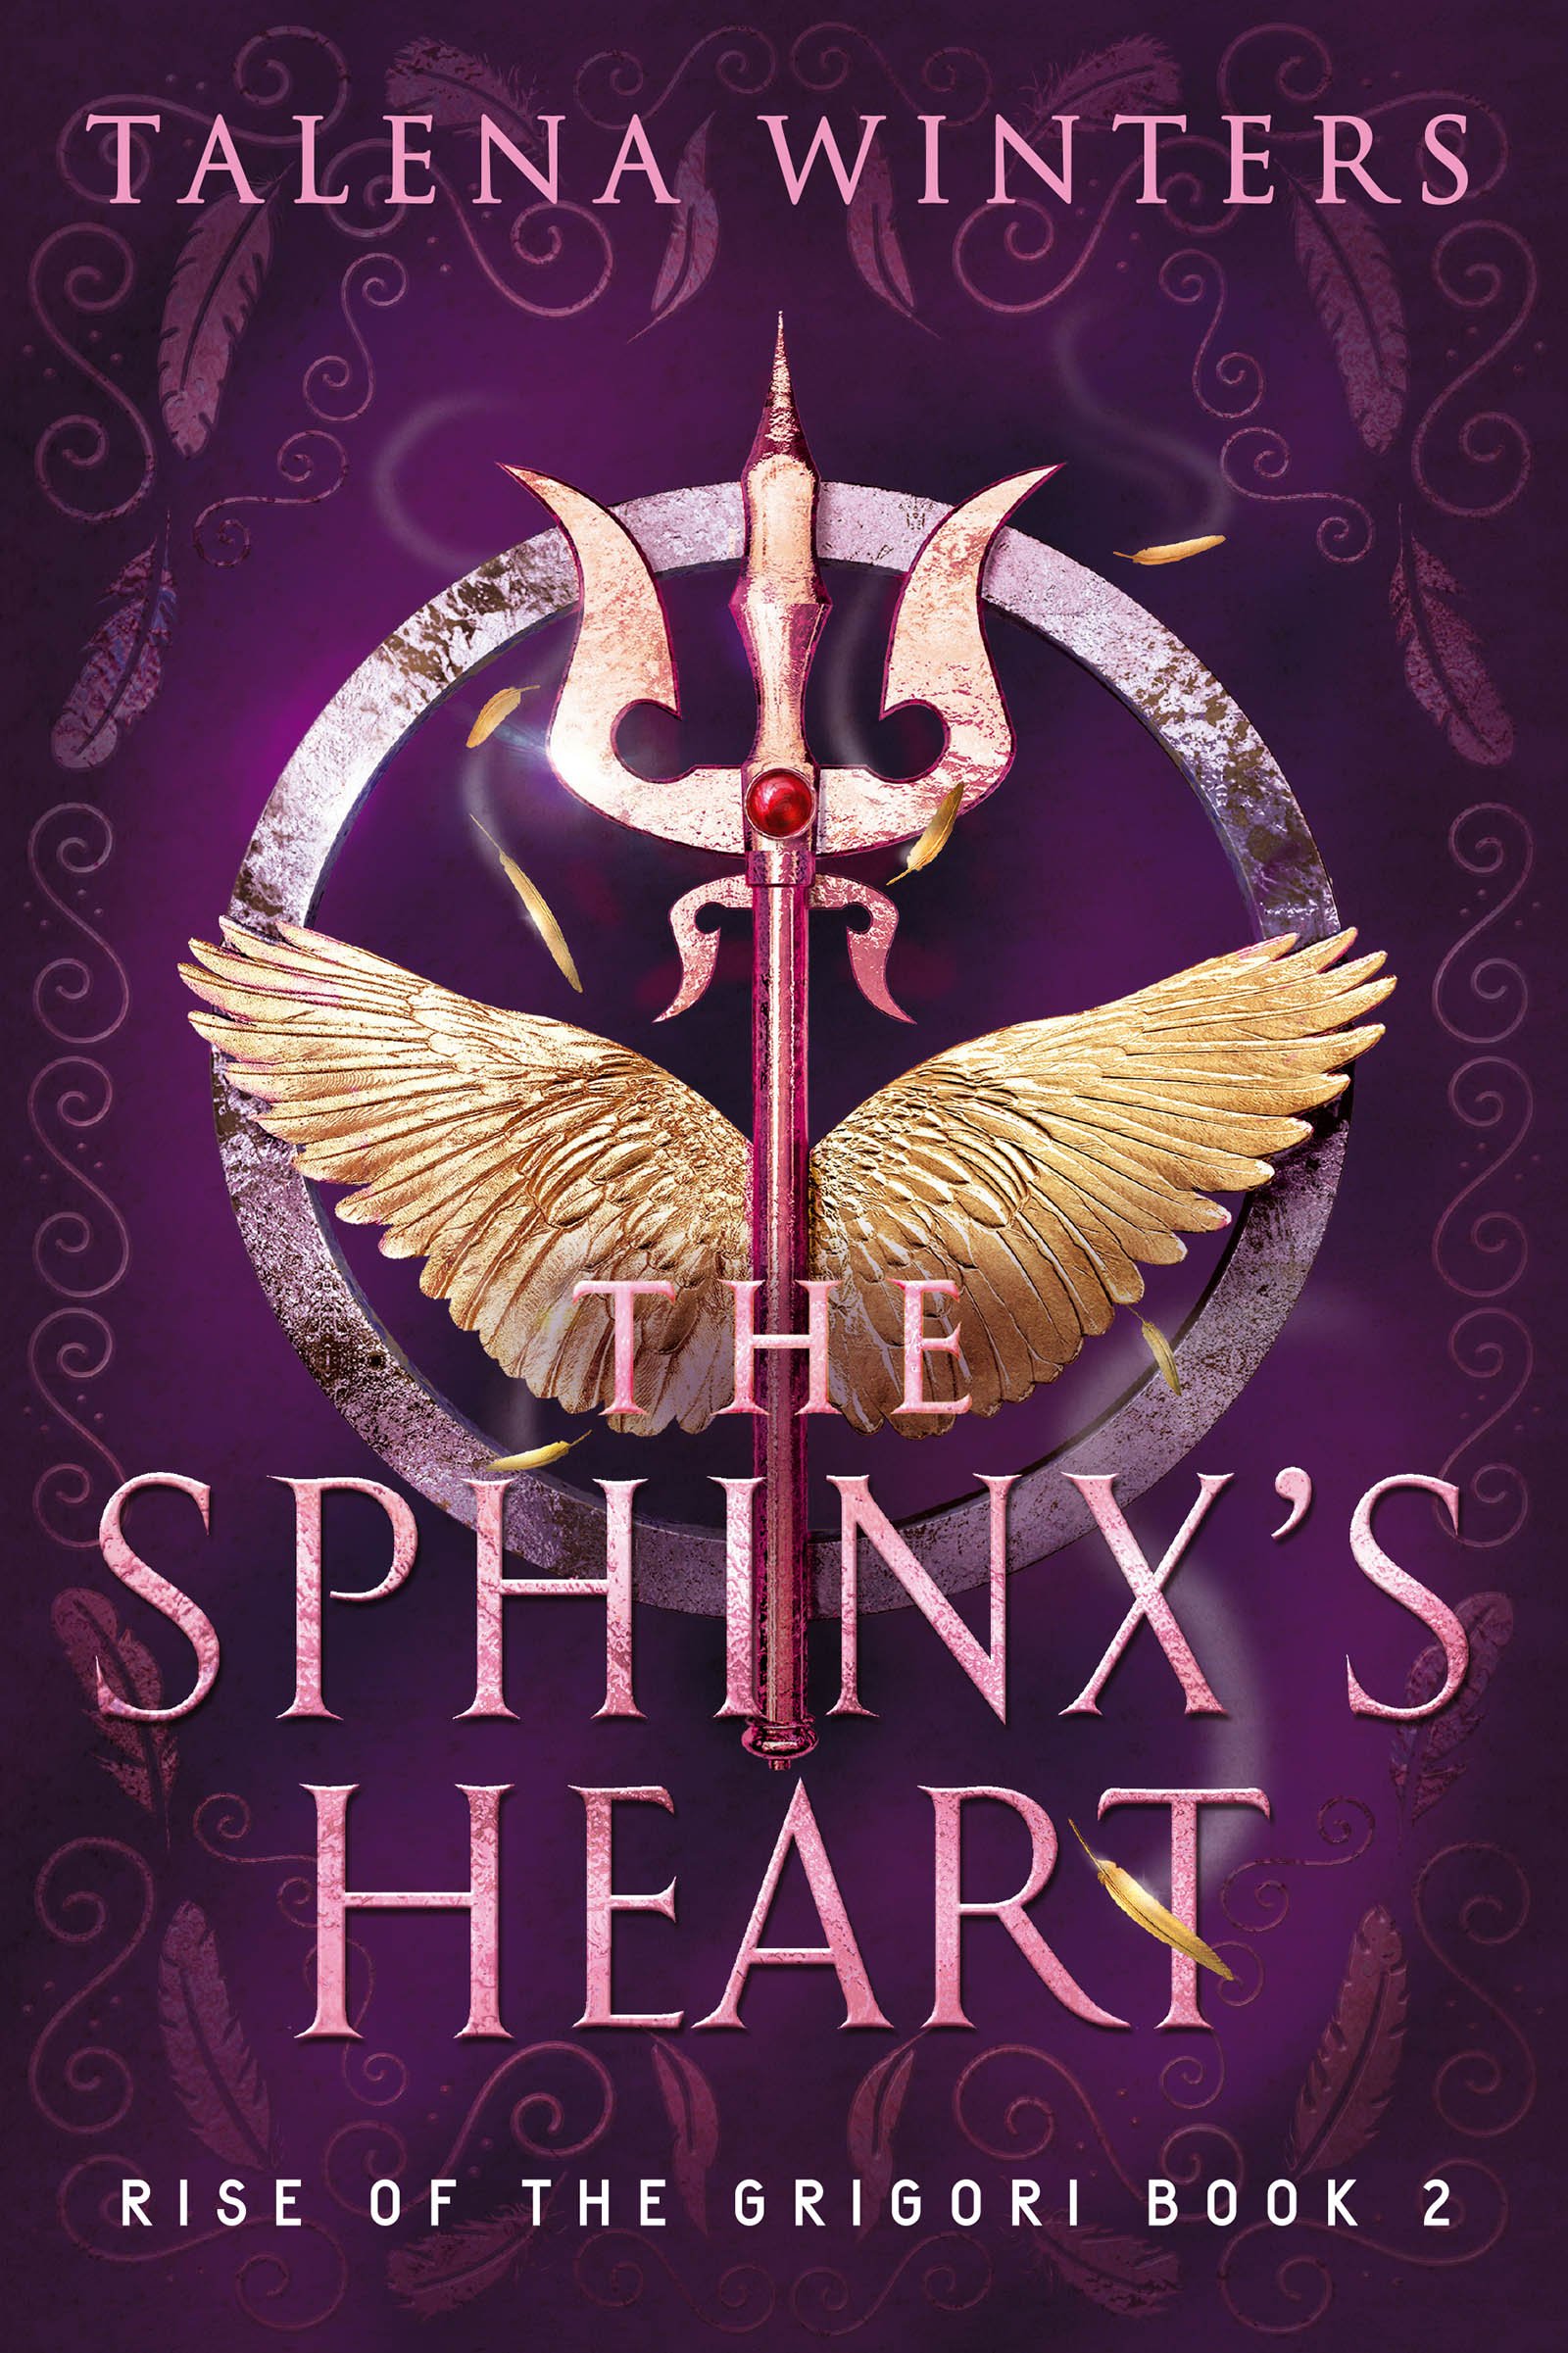 Current cover for The Sphinx's Heart with the Heart on the trident